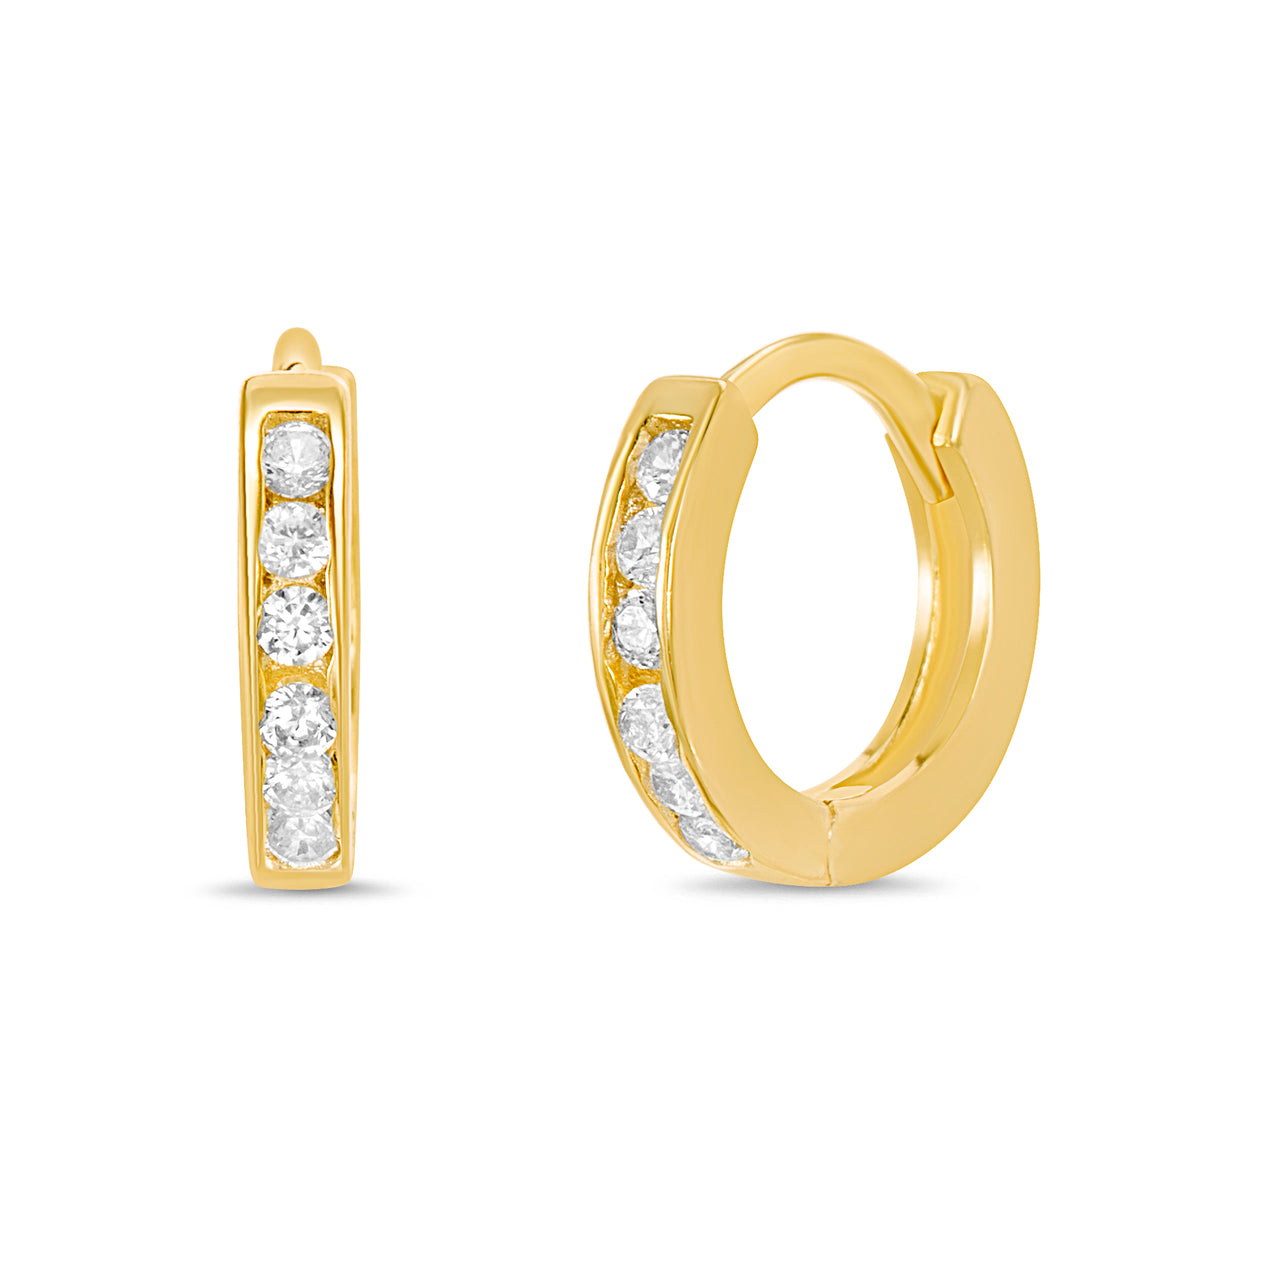 Lesa Michele Round Cut Cubic Zirconia Huggie Hoop Earrings in Yellow Gold Plated Sterling Silver